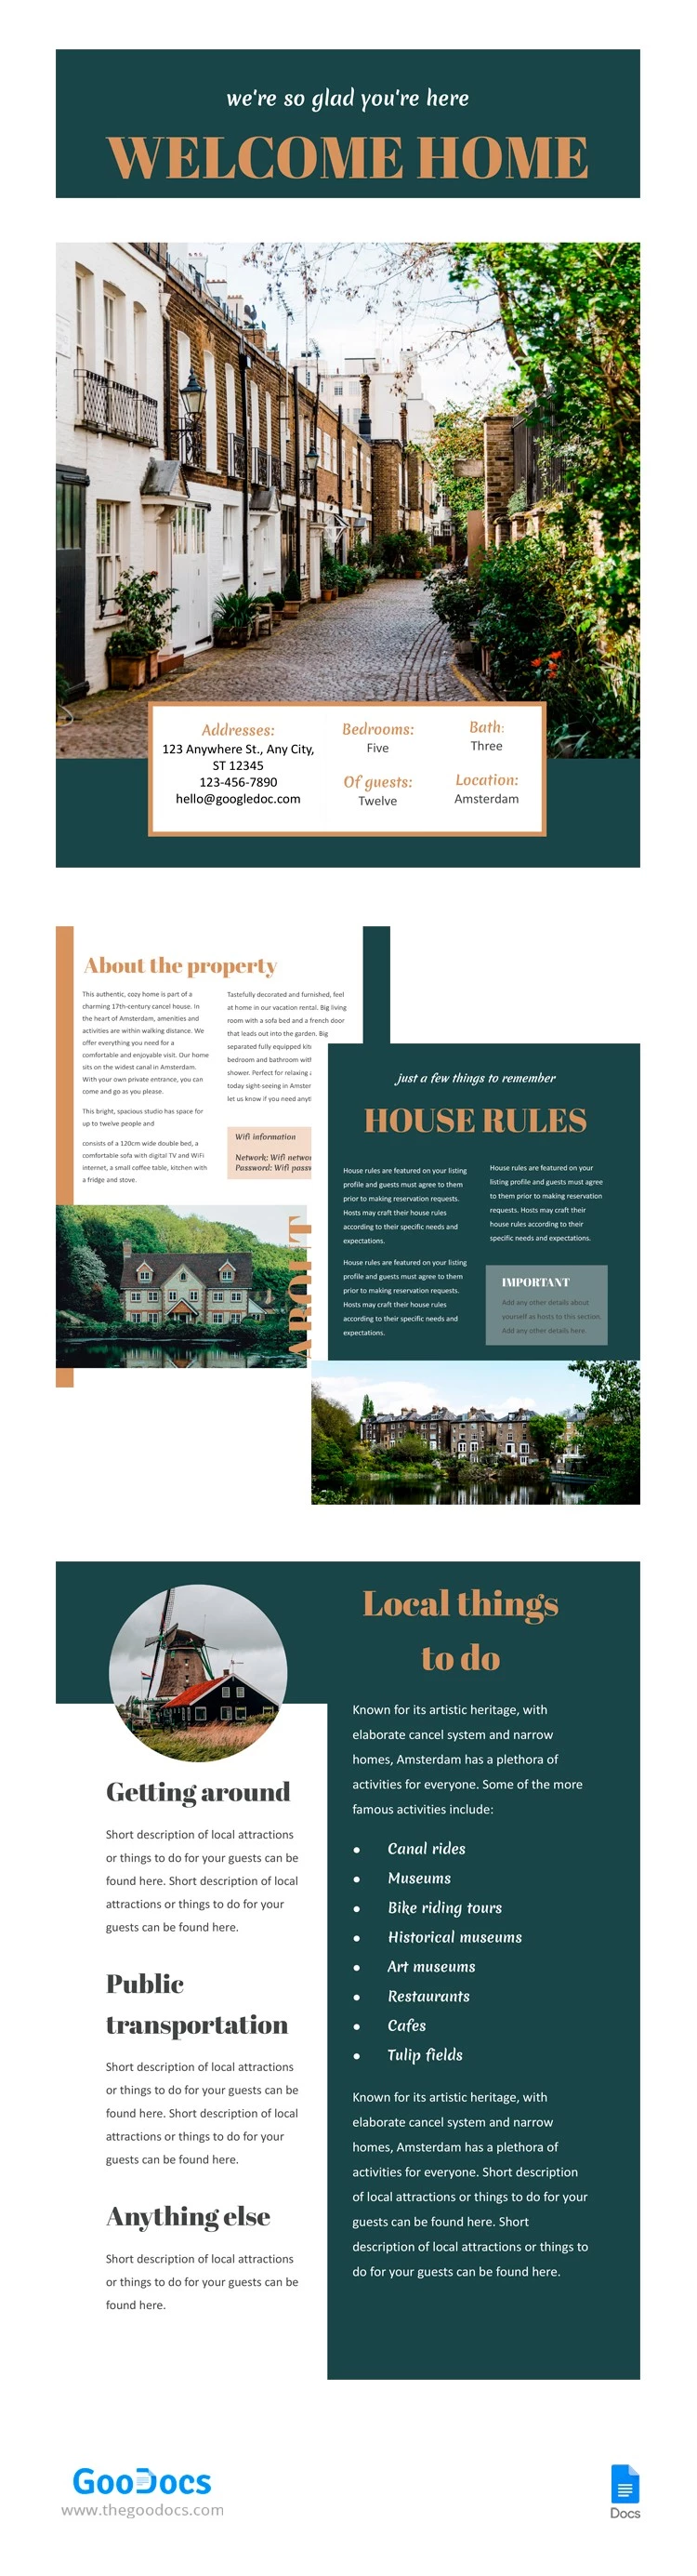 Beautiful Airbnb Welcome Book - free Google Docs Template - 10062220